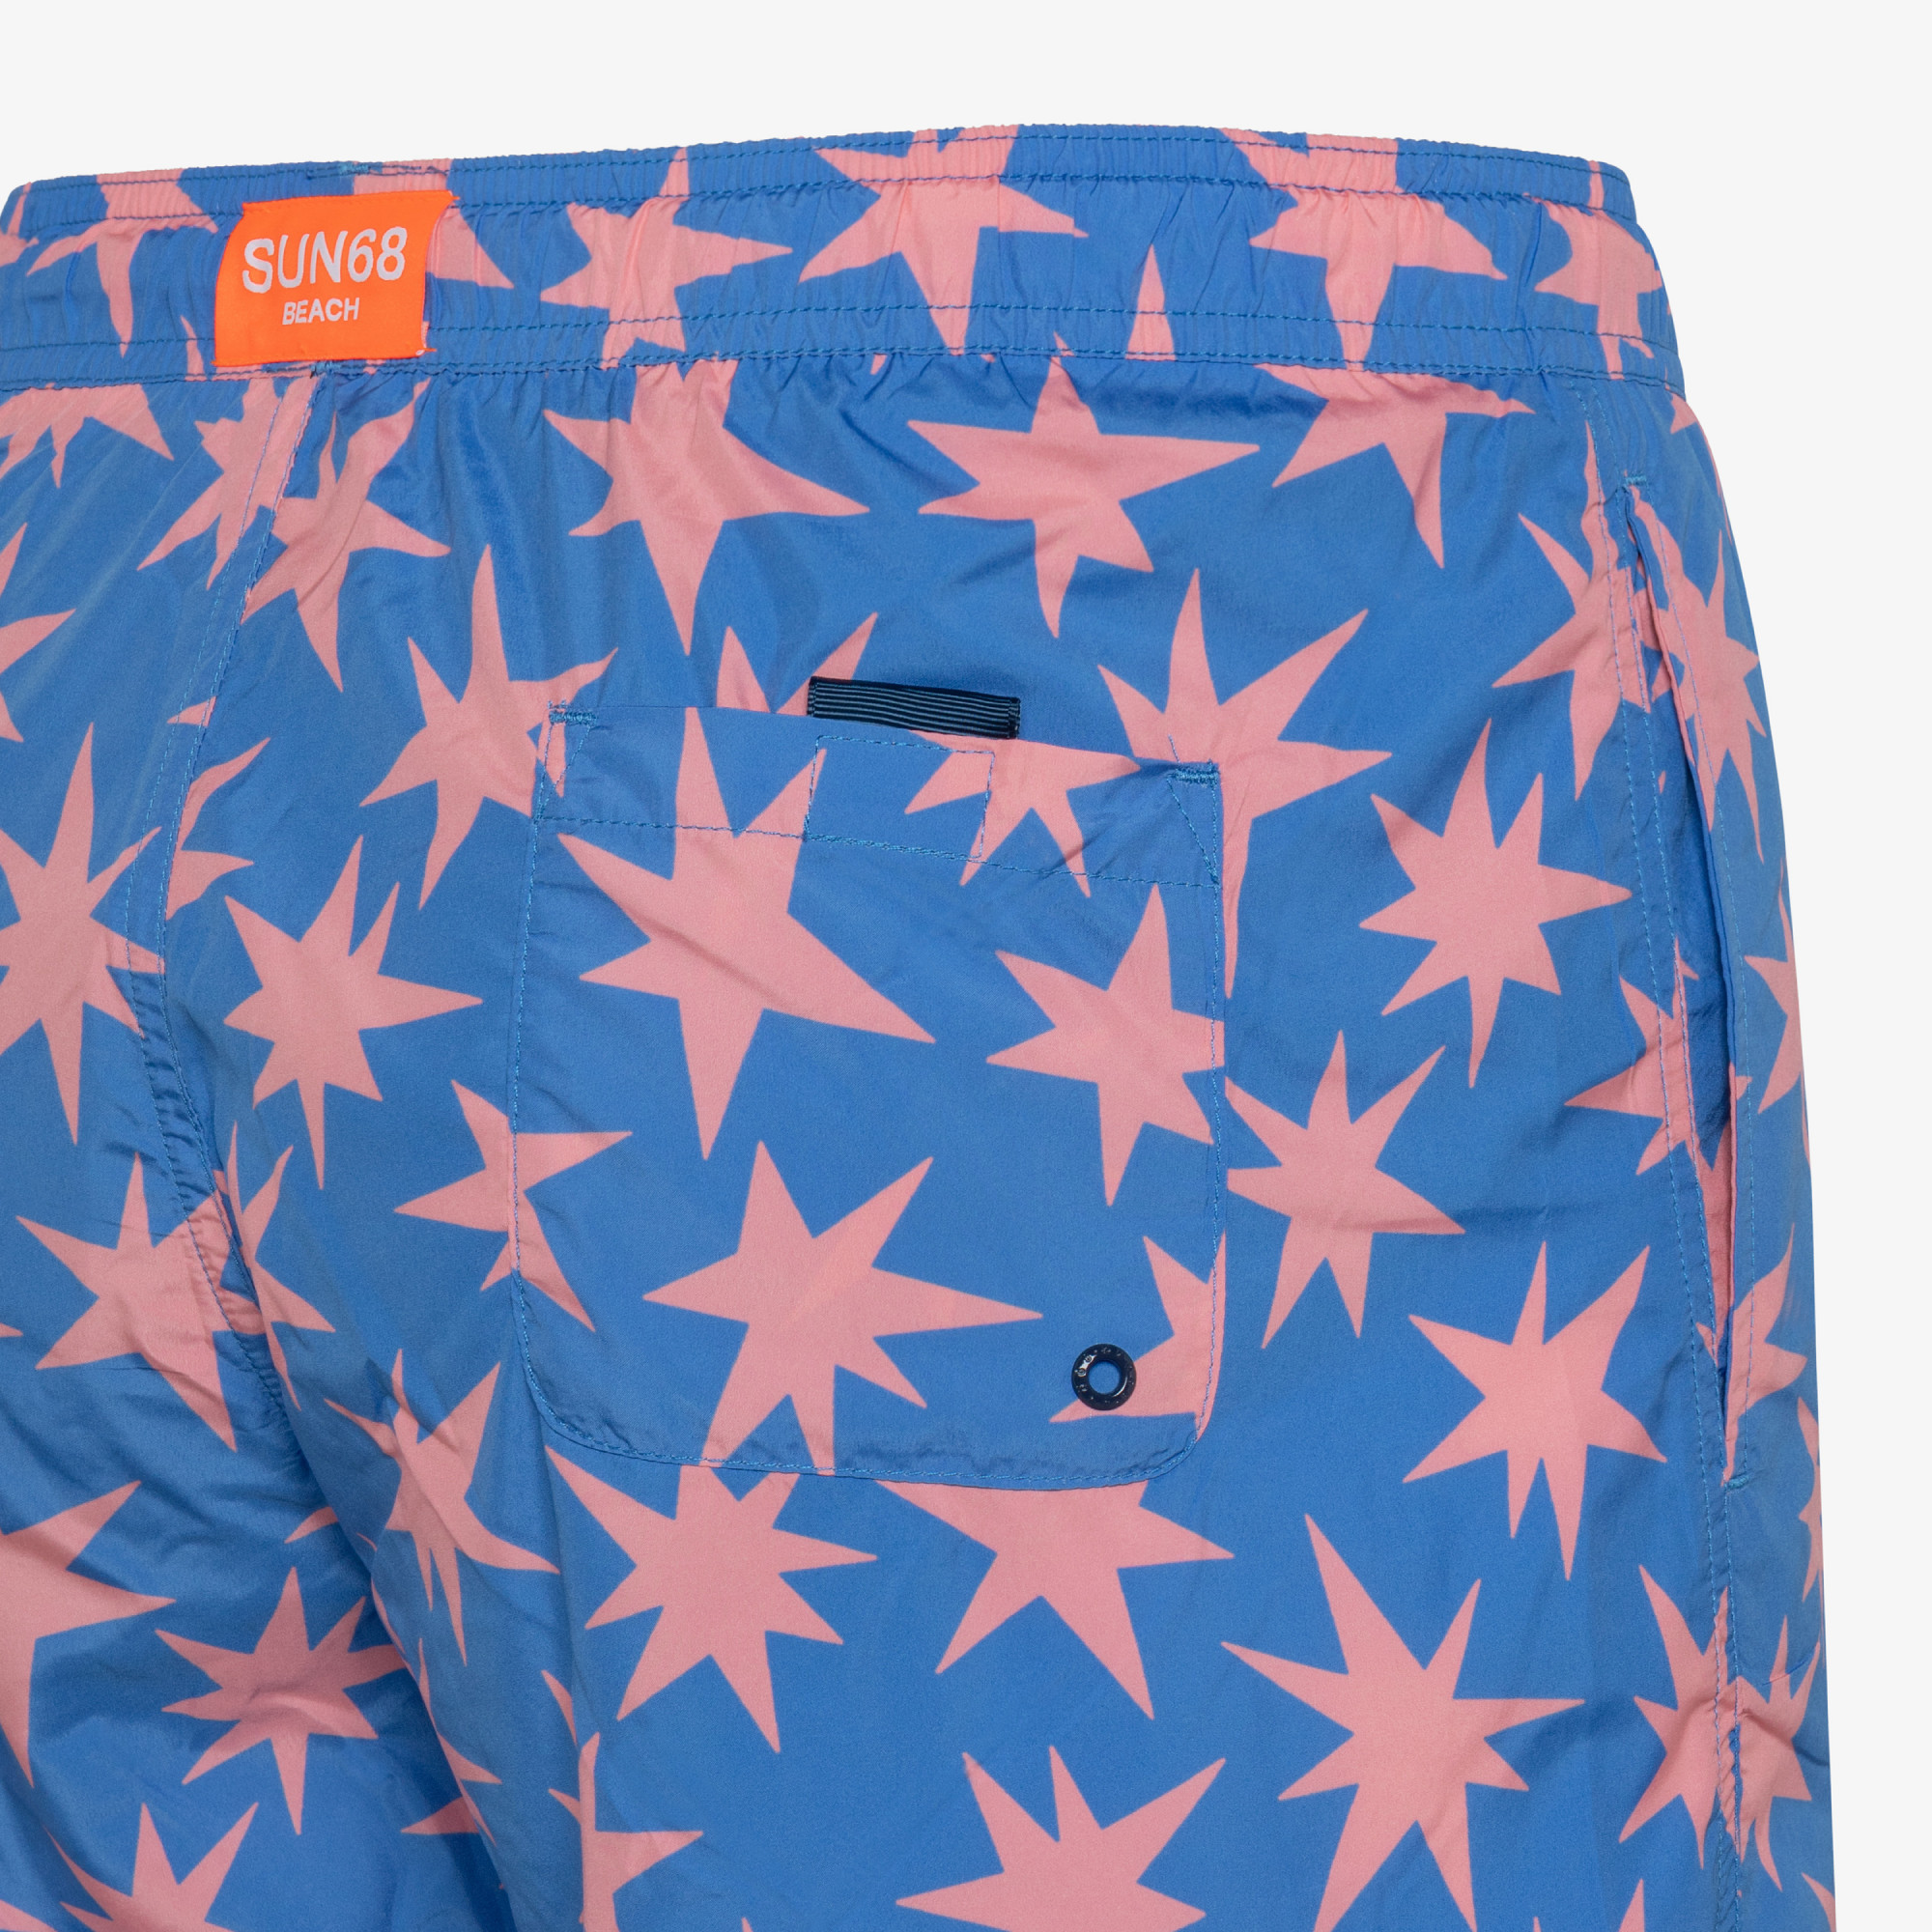 SWIM PANT ABSTRACT BLUE/PINK